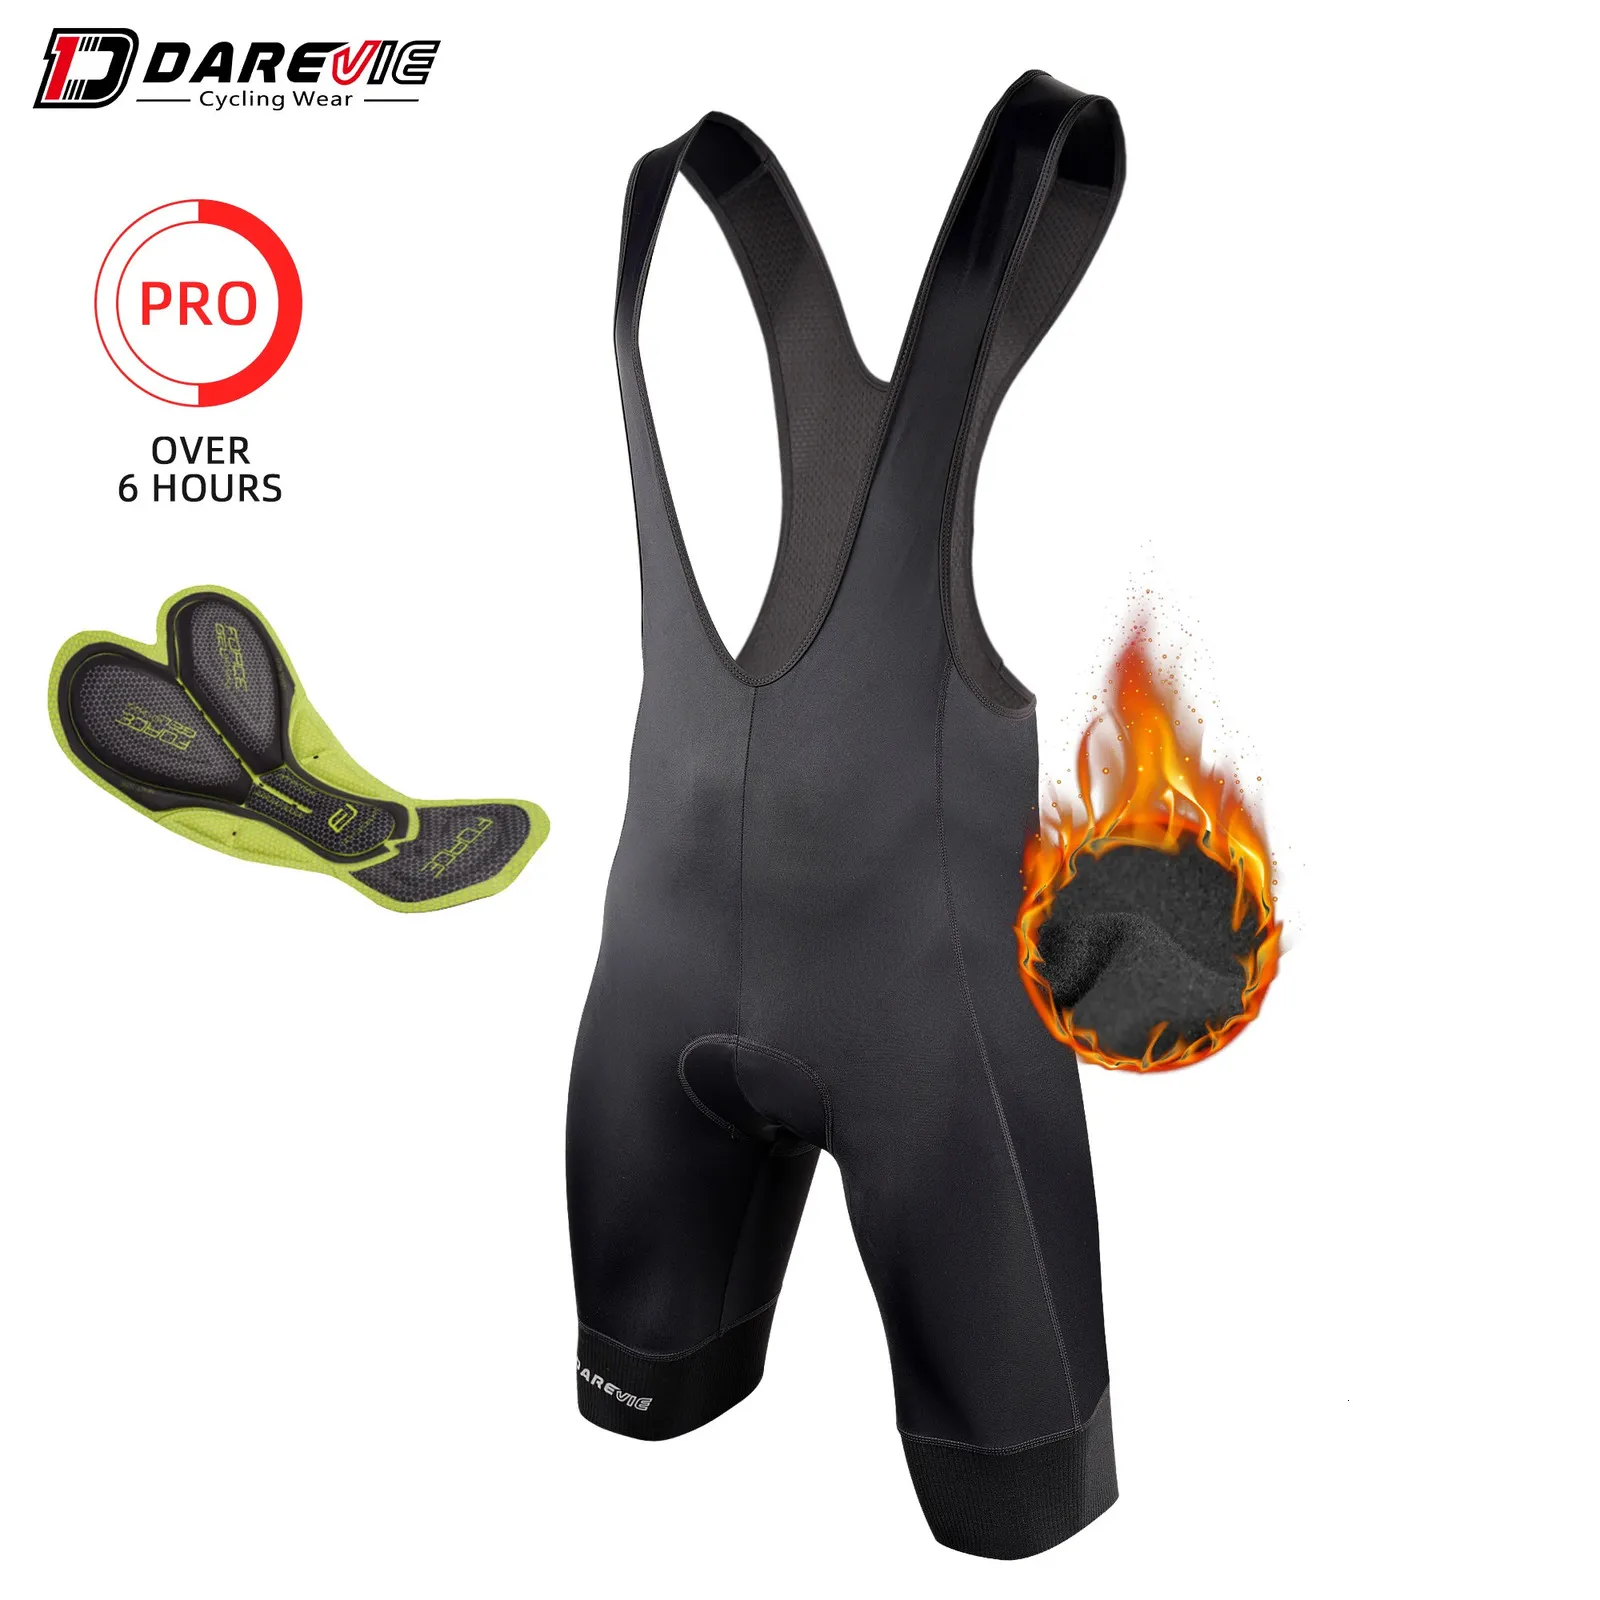 Darevie winter thermal cycle bib shorts mens gel pad 6 hours mens bicycle shorts with 7cm holder suitable for 5-15 winter warmth 240425